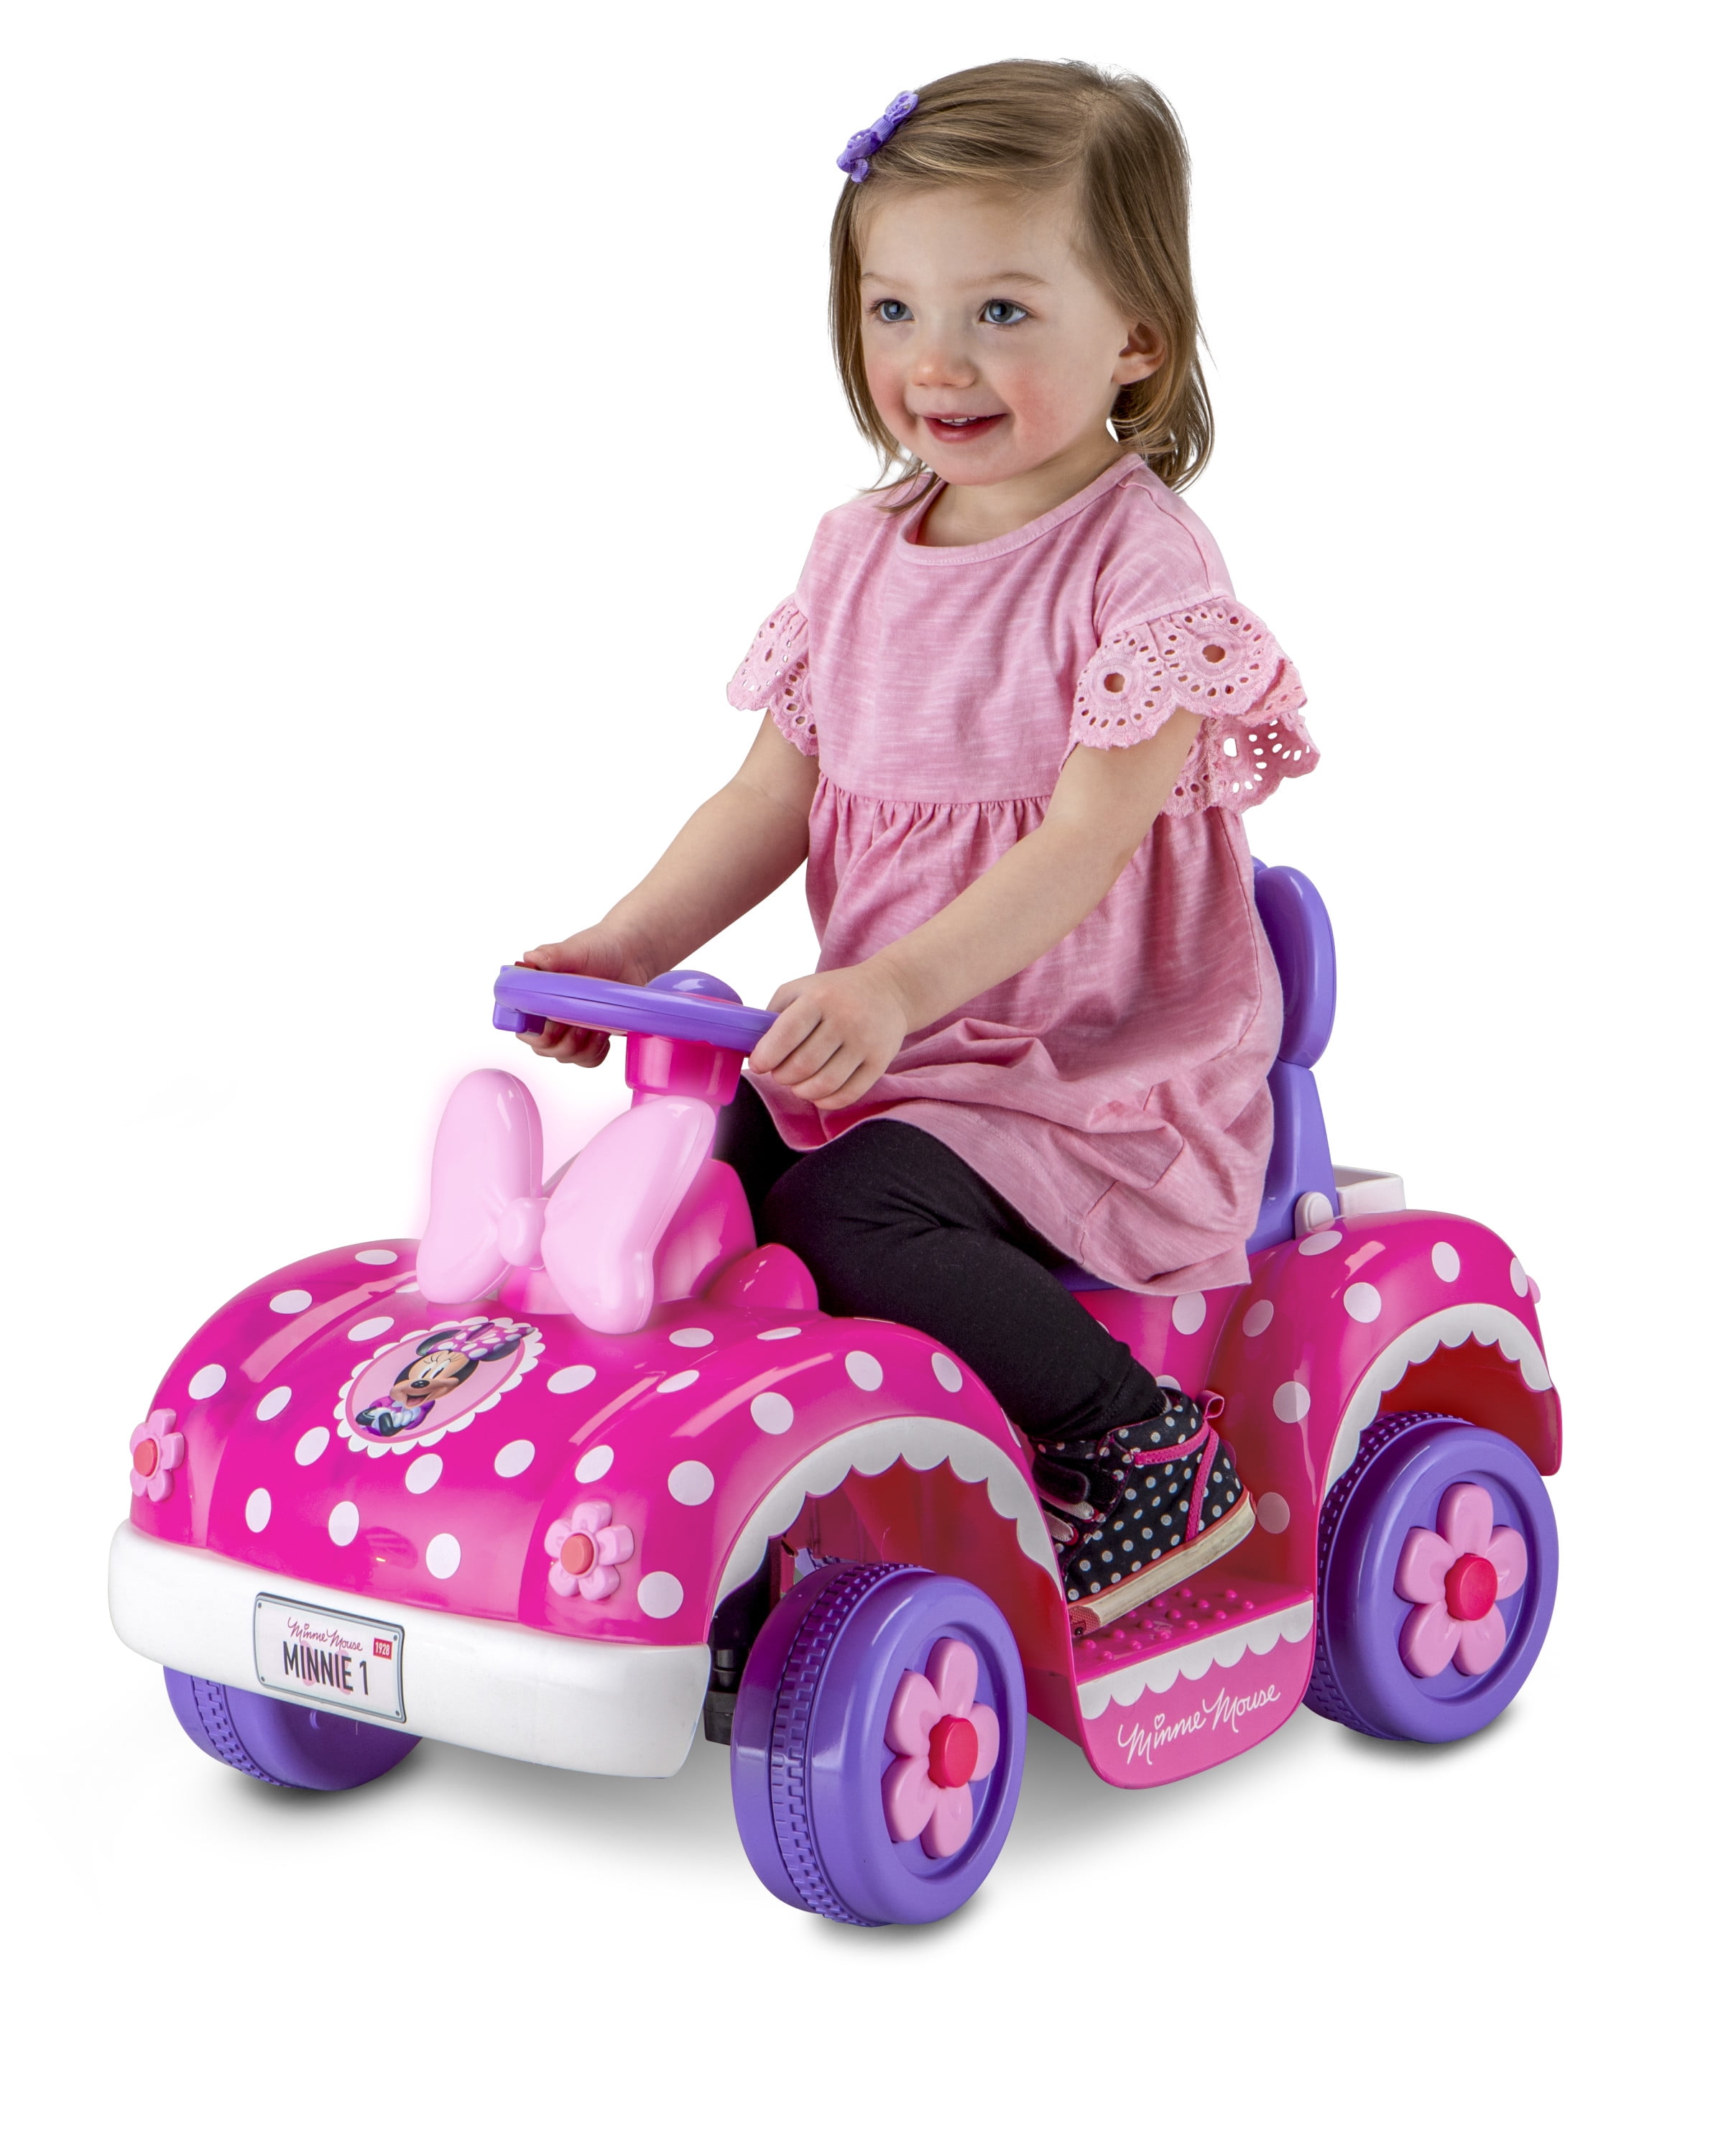 Disney's Minnie Mouse Toddler RideOn Toy by Kid Trax